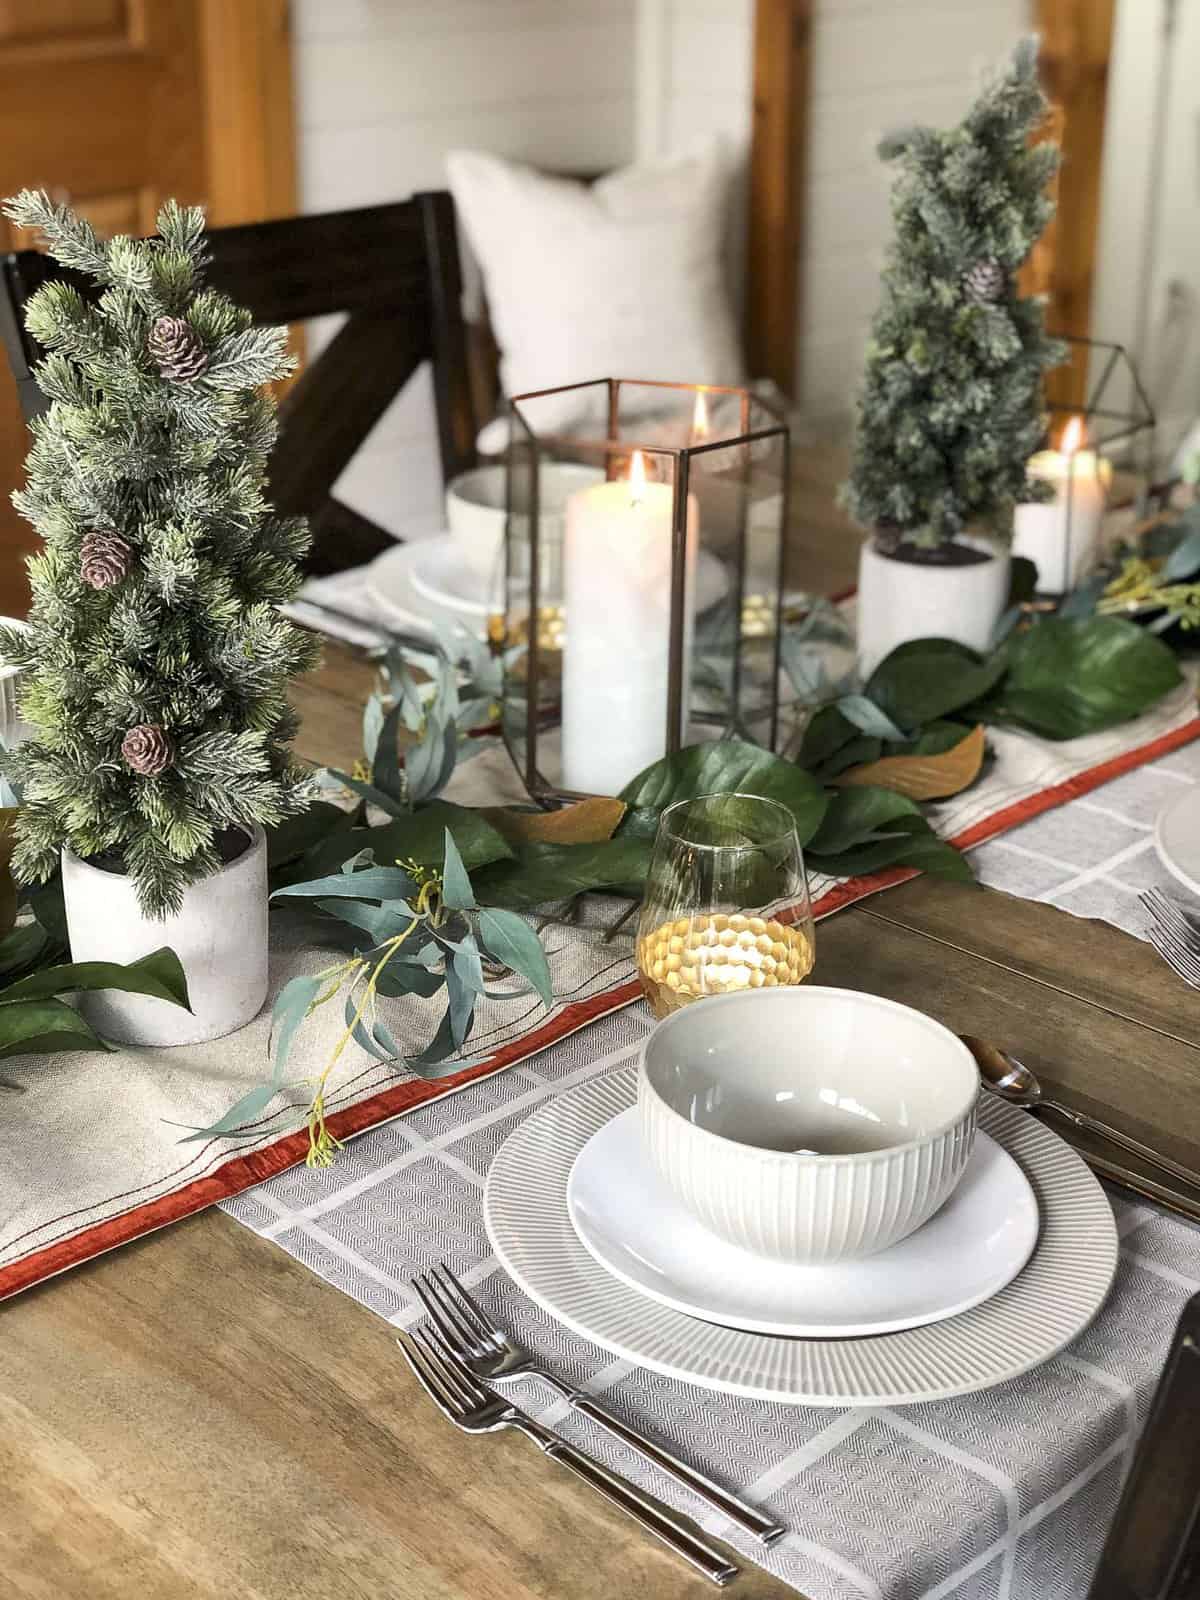 Are you planning a holiday get together? No need to buy Christmas dishes! Here are a few tips on how to use everyday dishes for your holiday table decor. #holidaytabledecor #christmasdecor